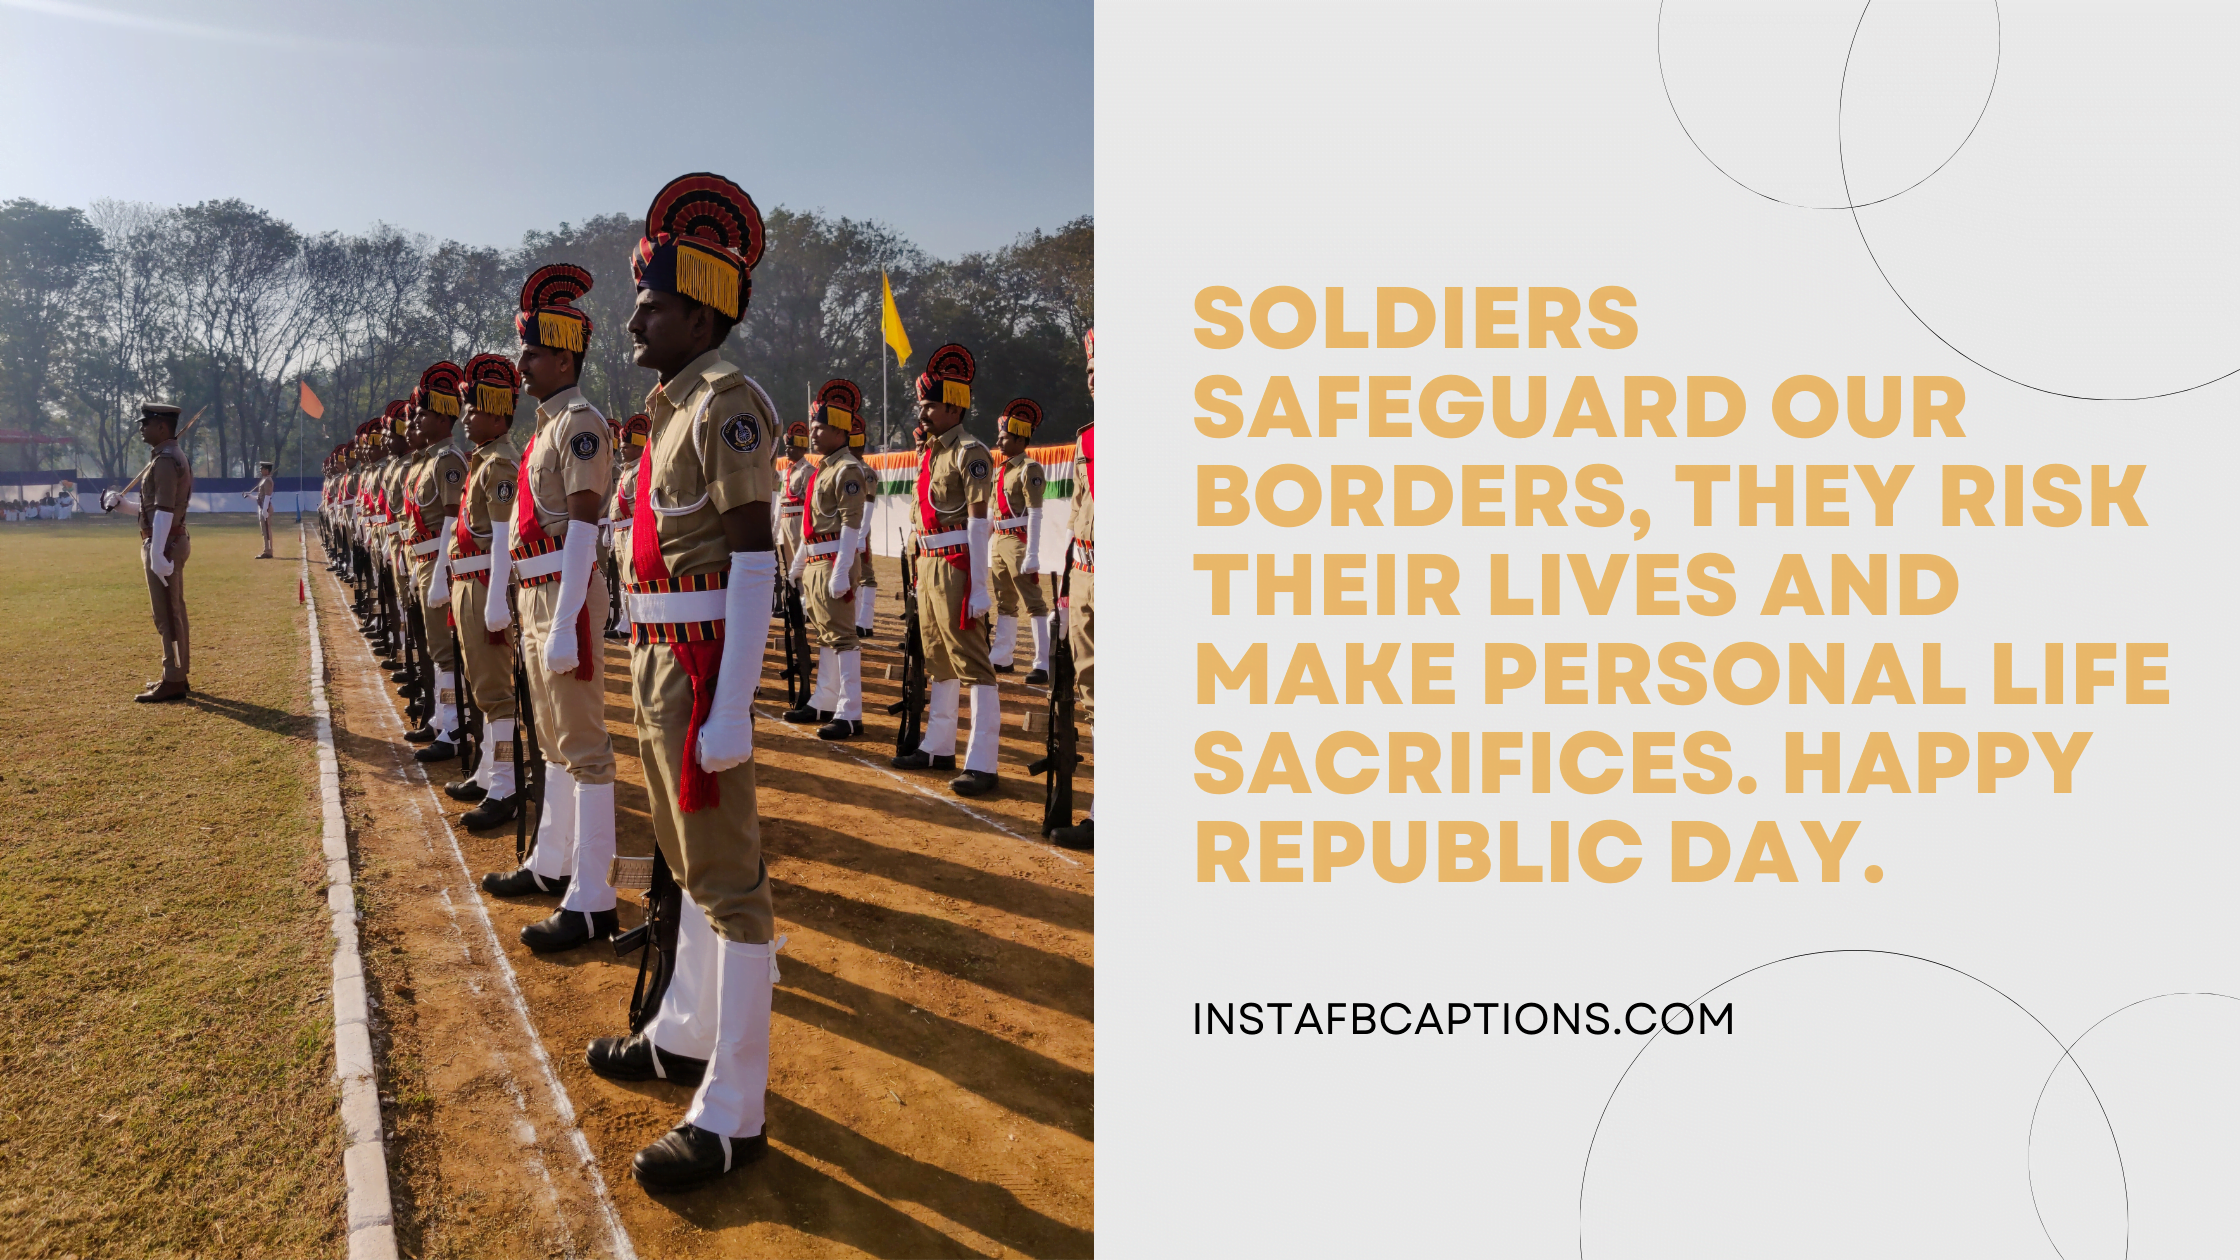 Soldiers safeguard our borders, they risk their lives and make personal life sacrifices. Happy republic day. republic day captions for instagram - Republic Day Captions for Soldiers - 100+ Republic Day Instagram Captions And Quotes 2022